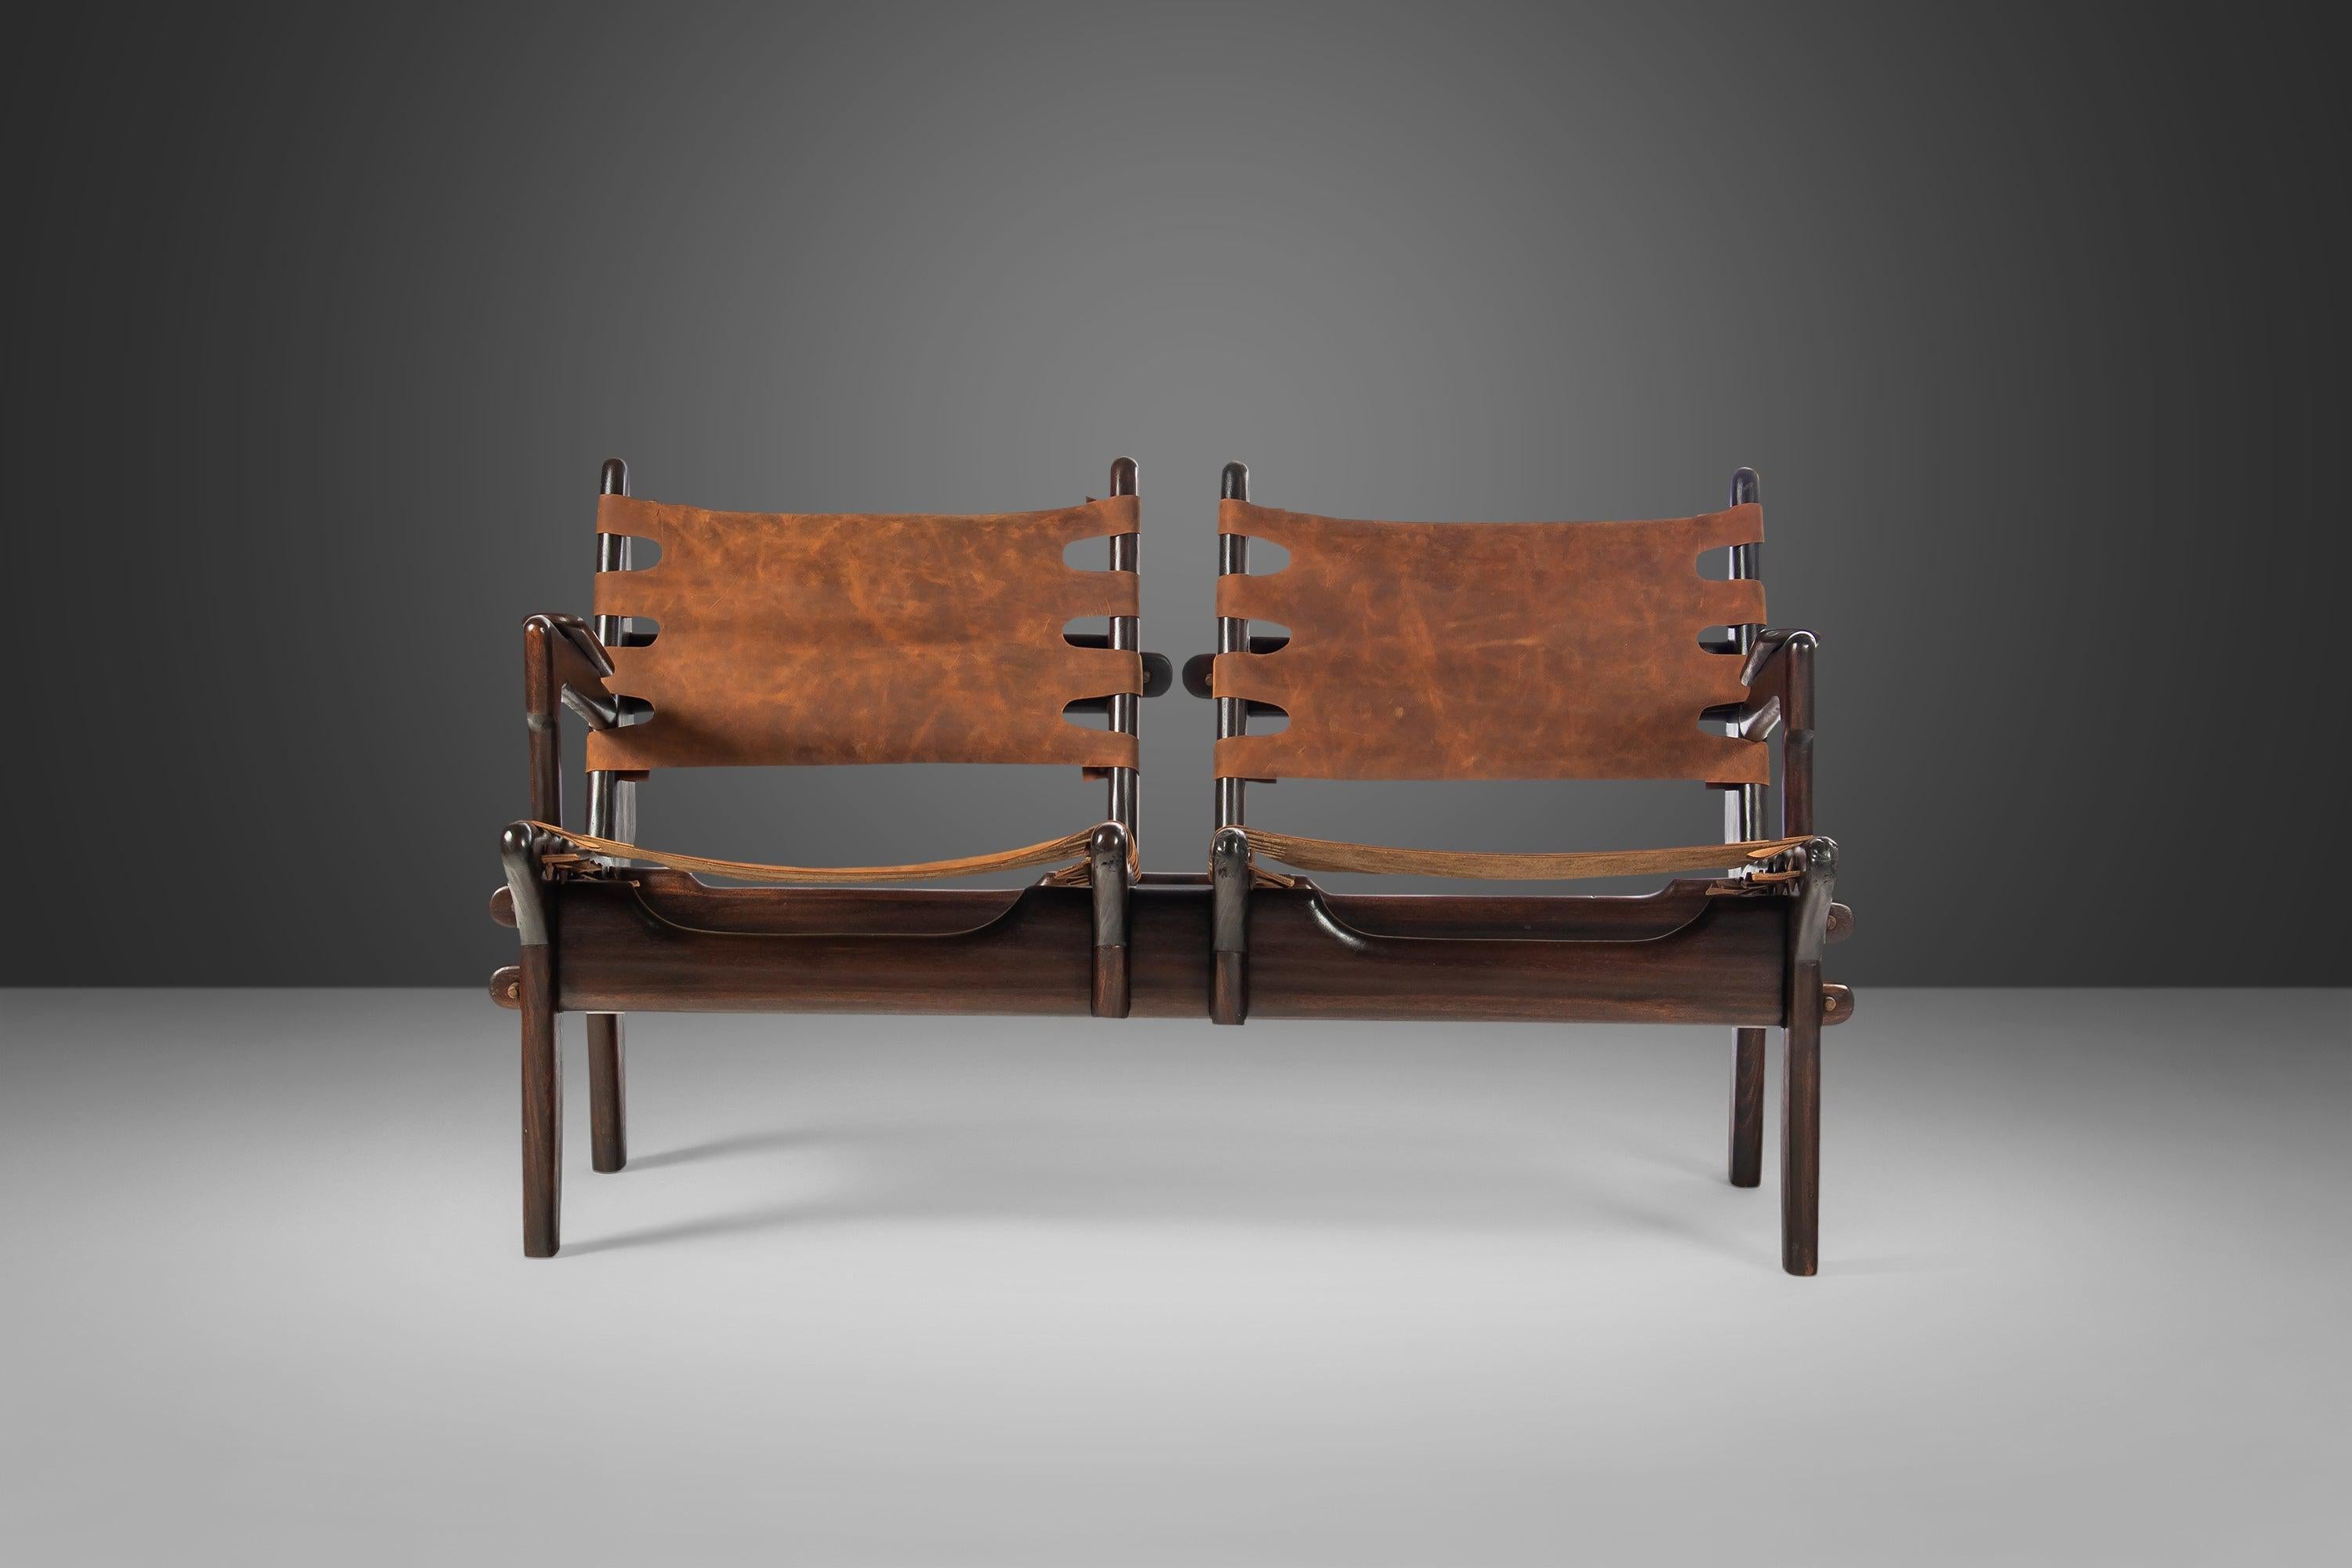 Loveseat in Solid Fruitwood & Leather by Angel Pazmino, Ecuador, c. 1960's For Sale 7